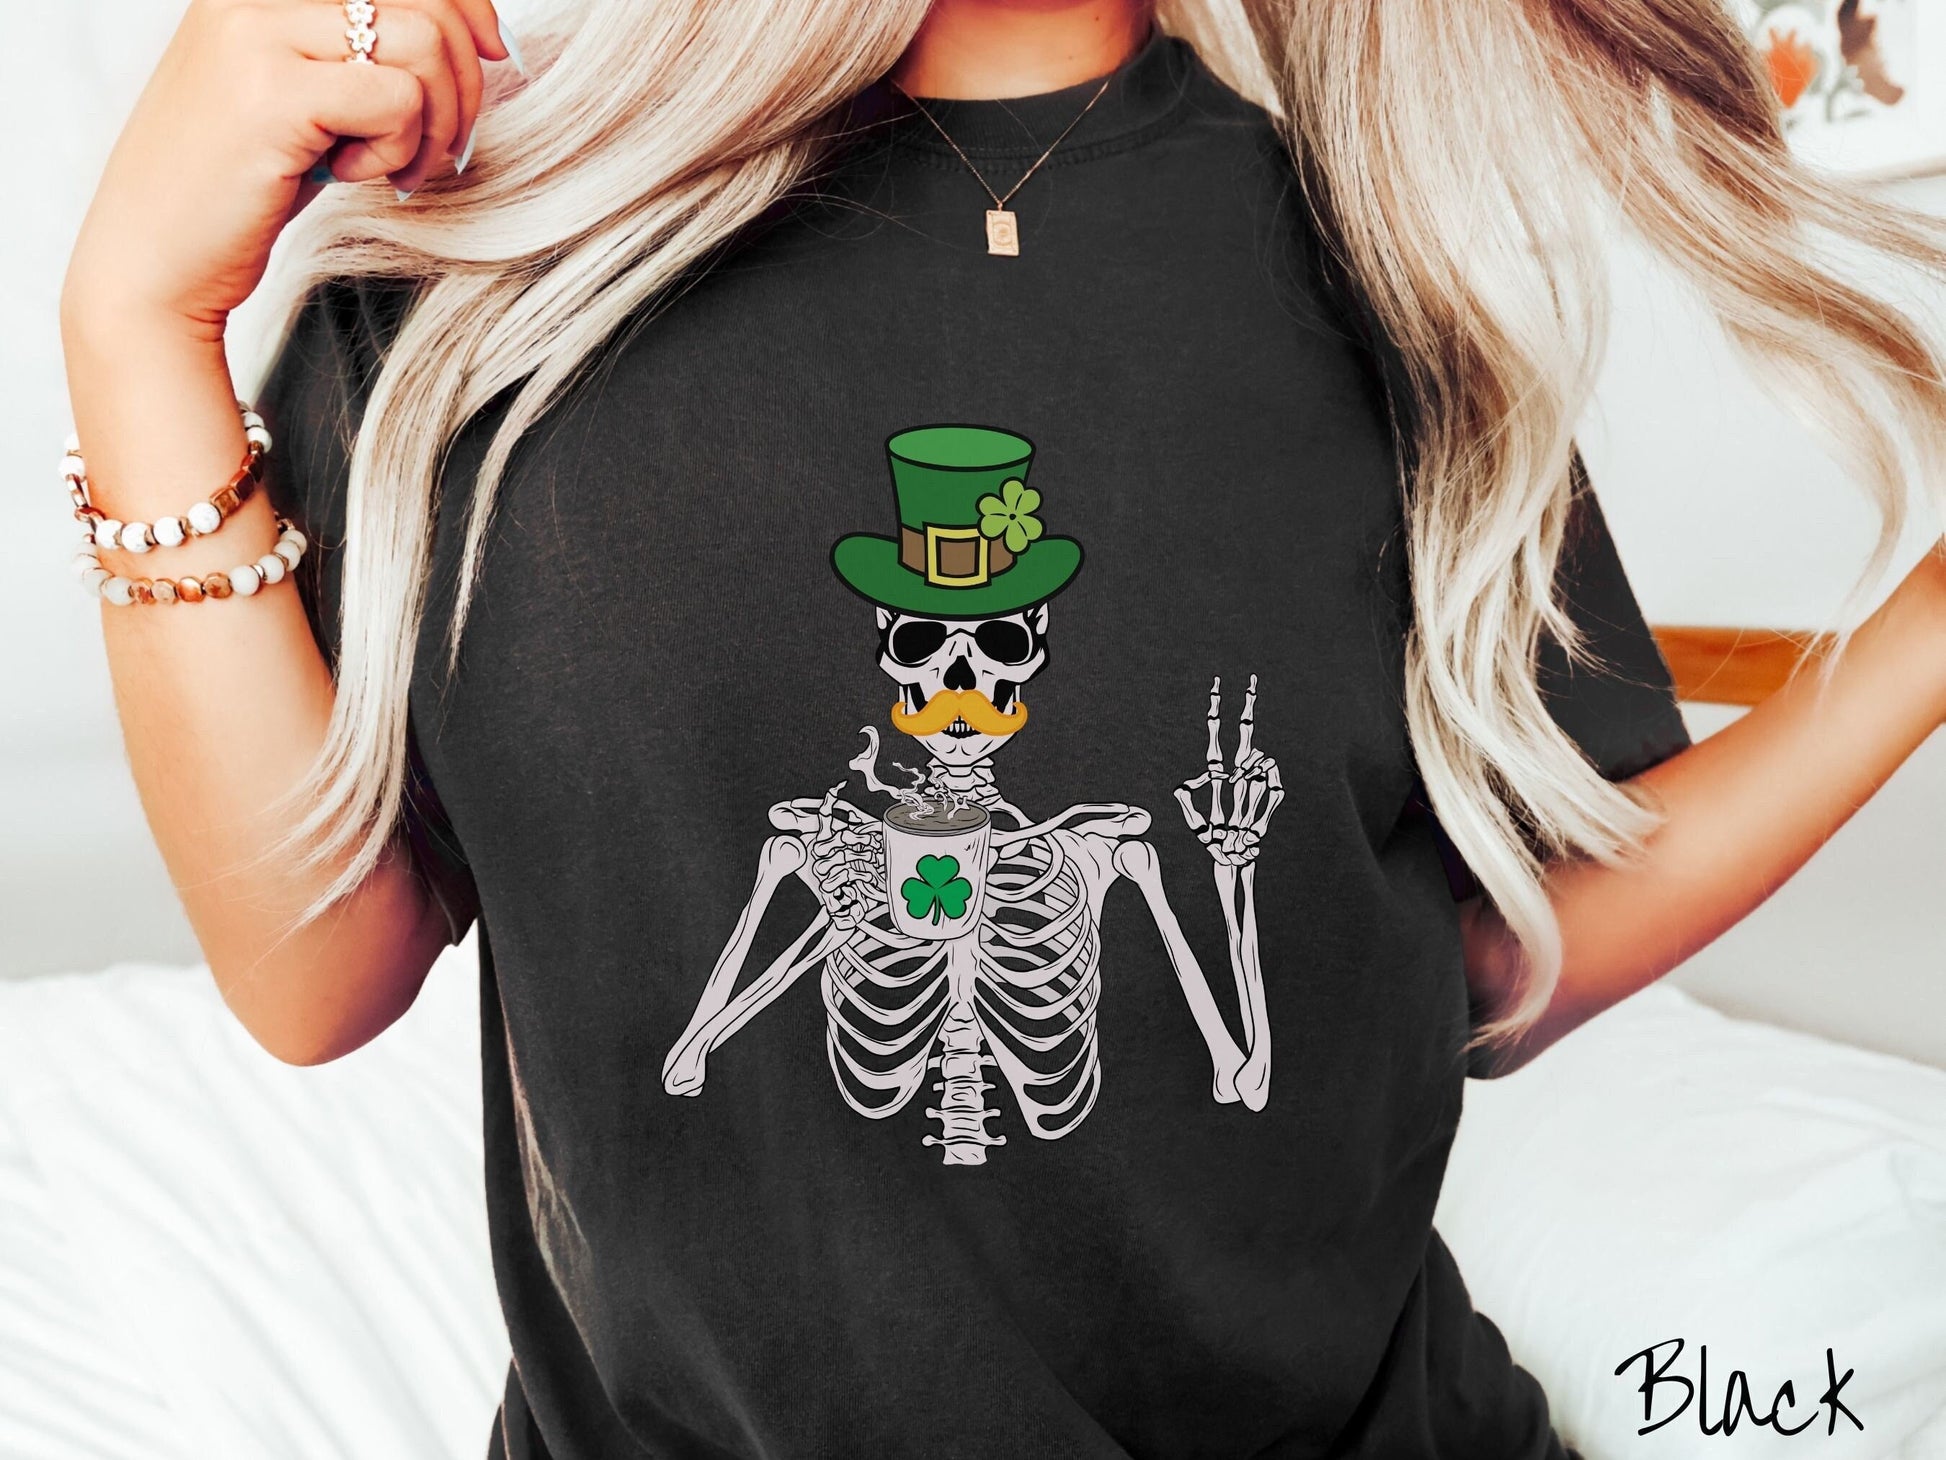 A woman wearing a vintage, black colored shirt with a skeleton wearing a green top hat with a green clover and an orange mustache showing the peace sign with its left hand and drinking out of a steaming hot coffee cup with a three leaf clover on it.